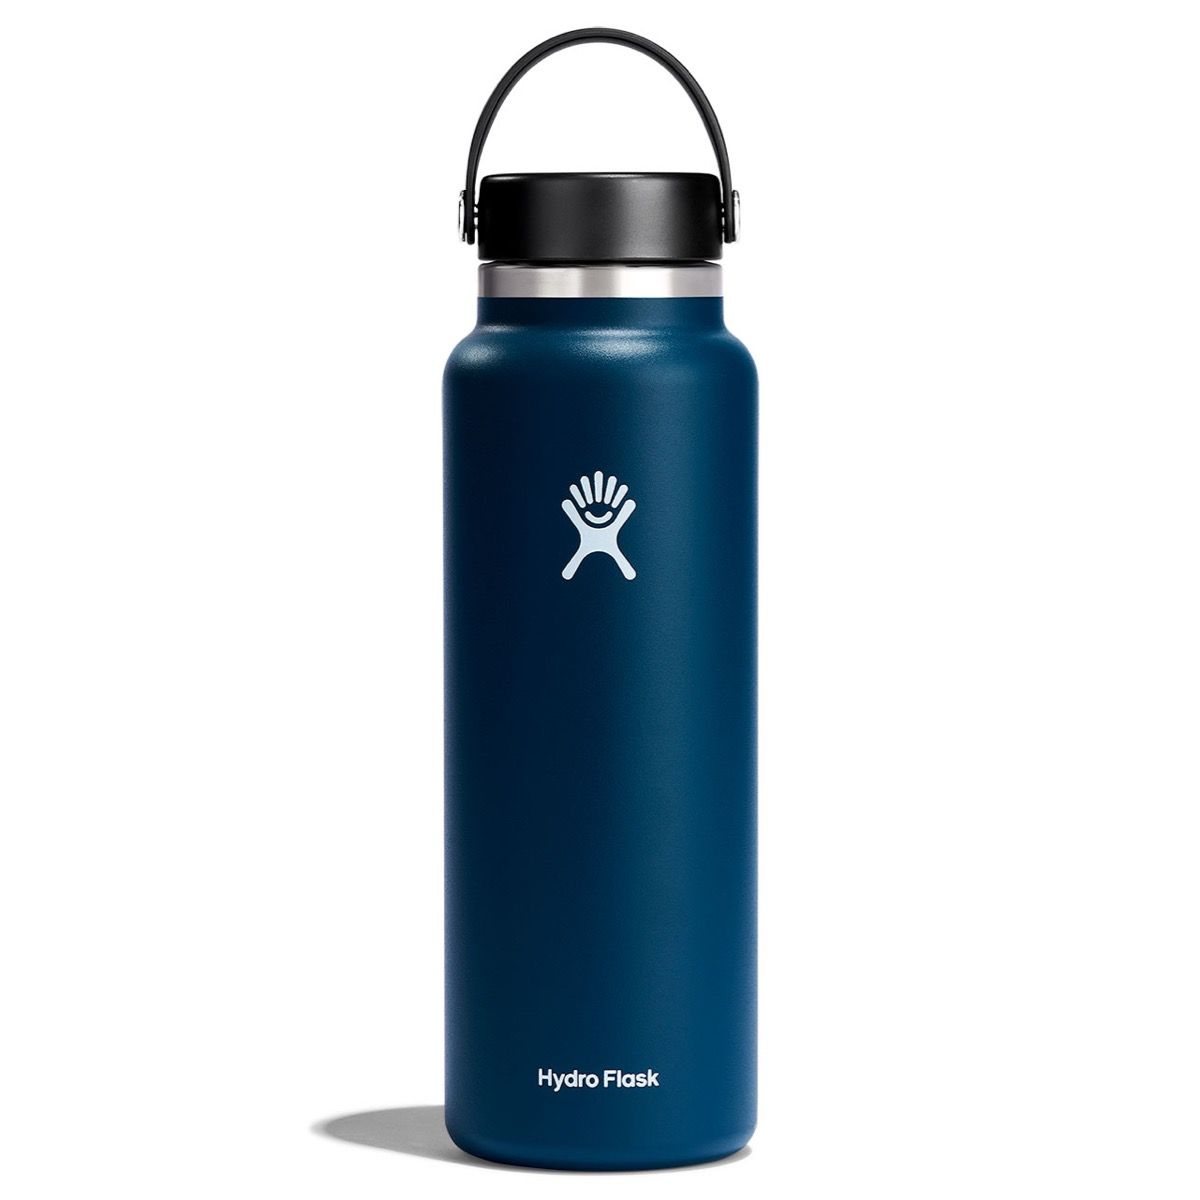 Hydro Flask 40oz Wide Mouth with Flex Cap